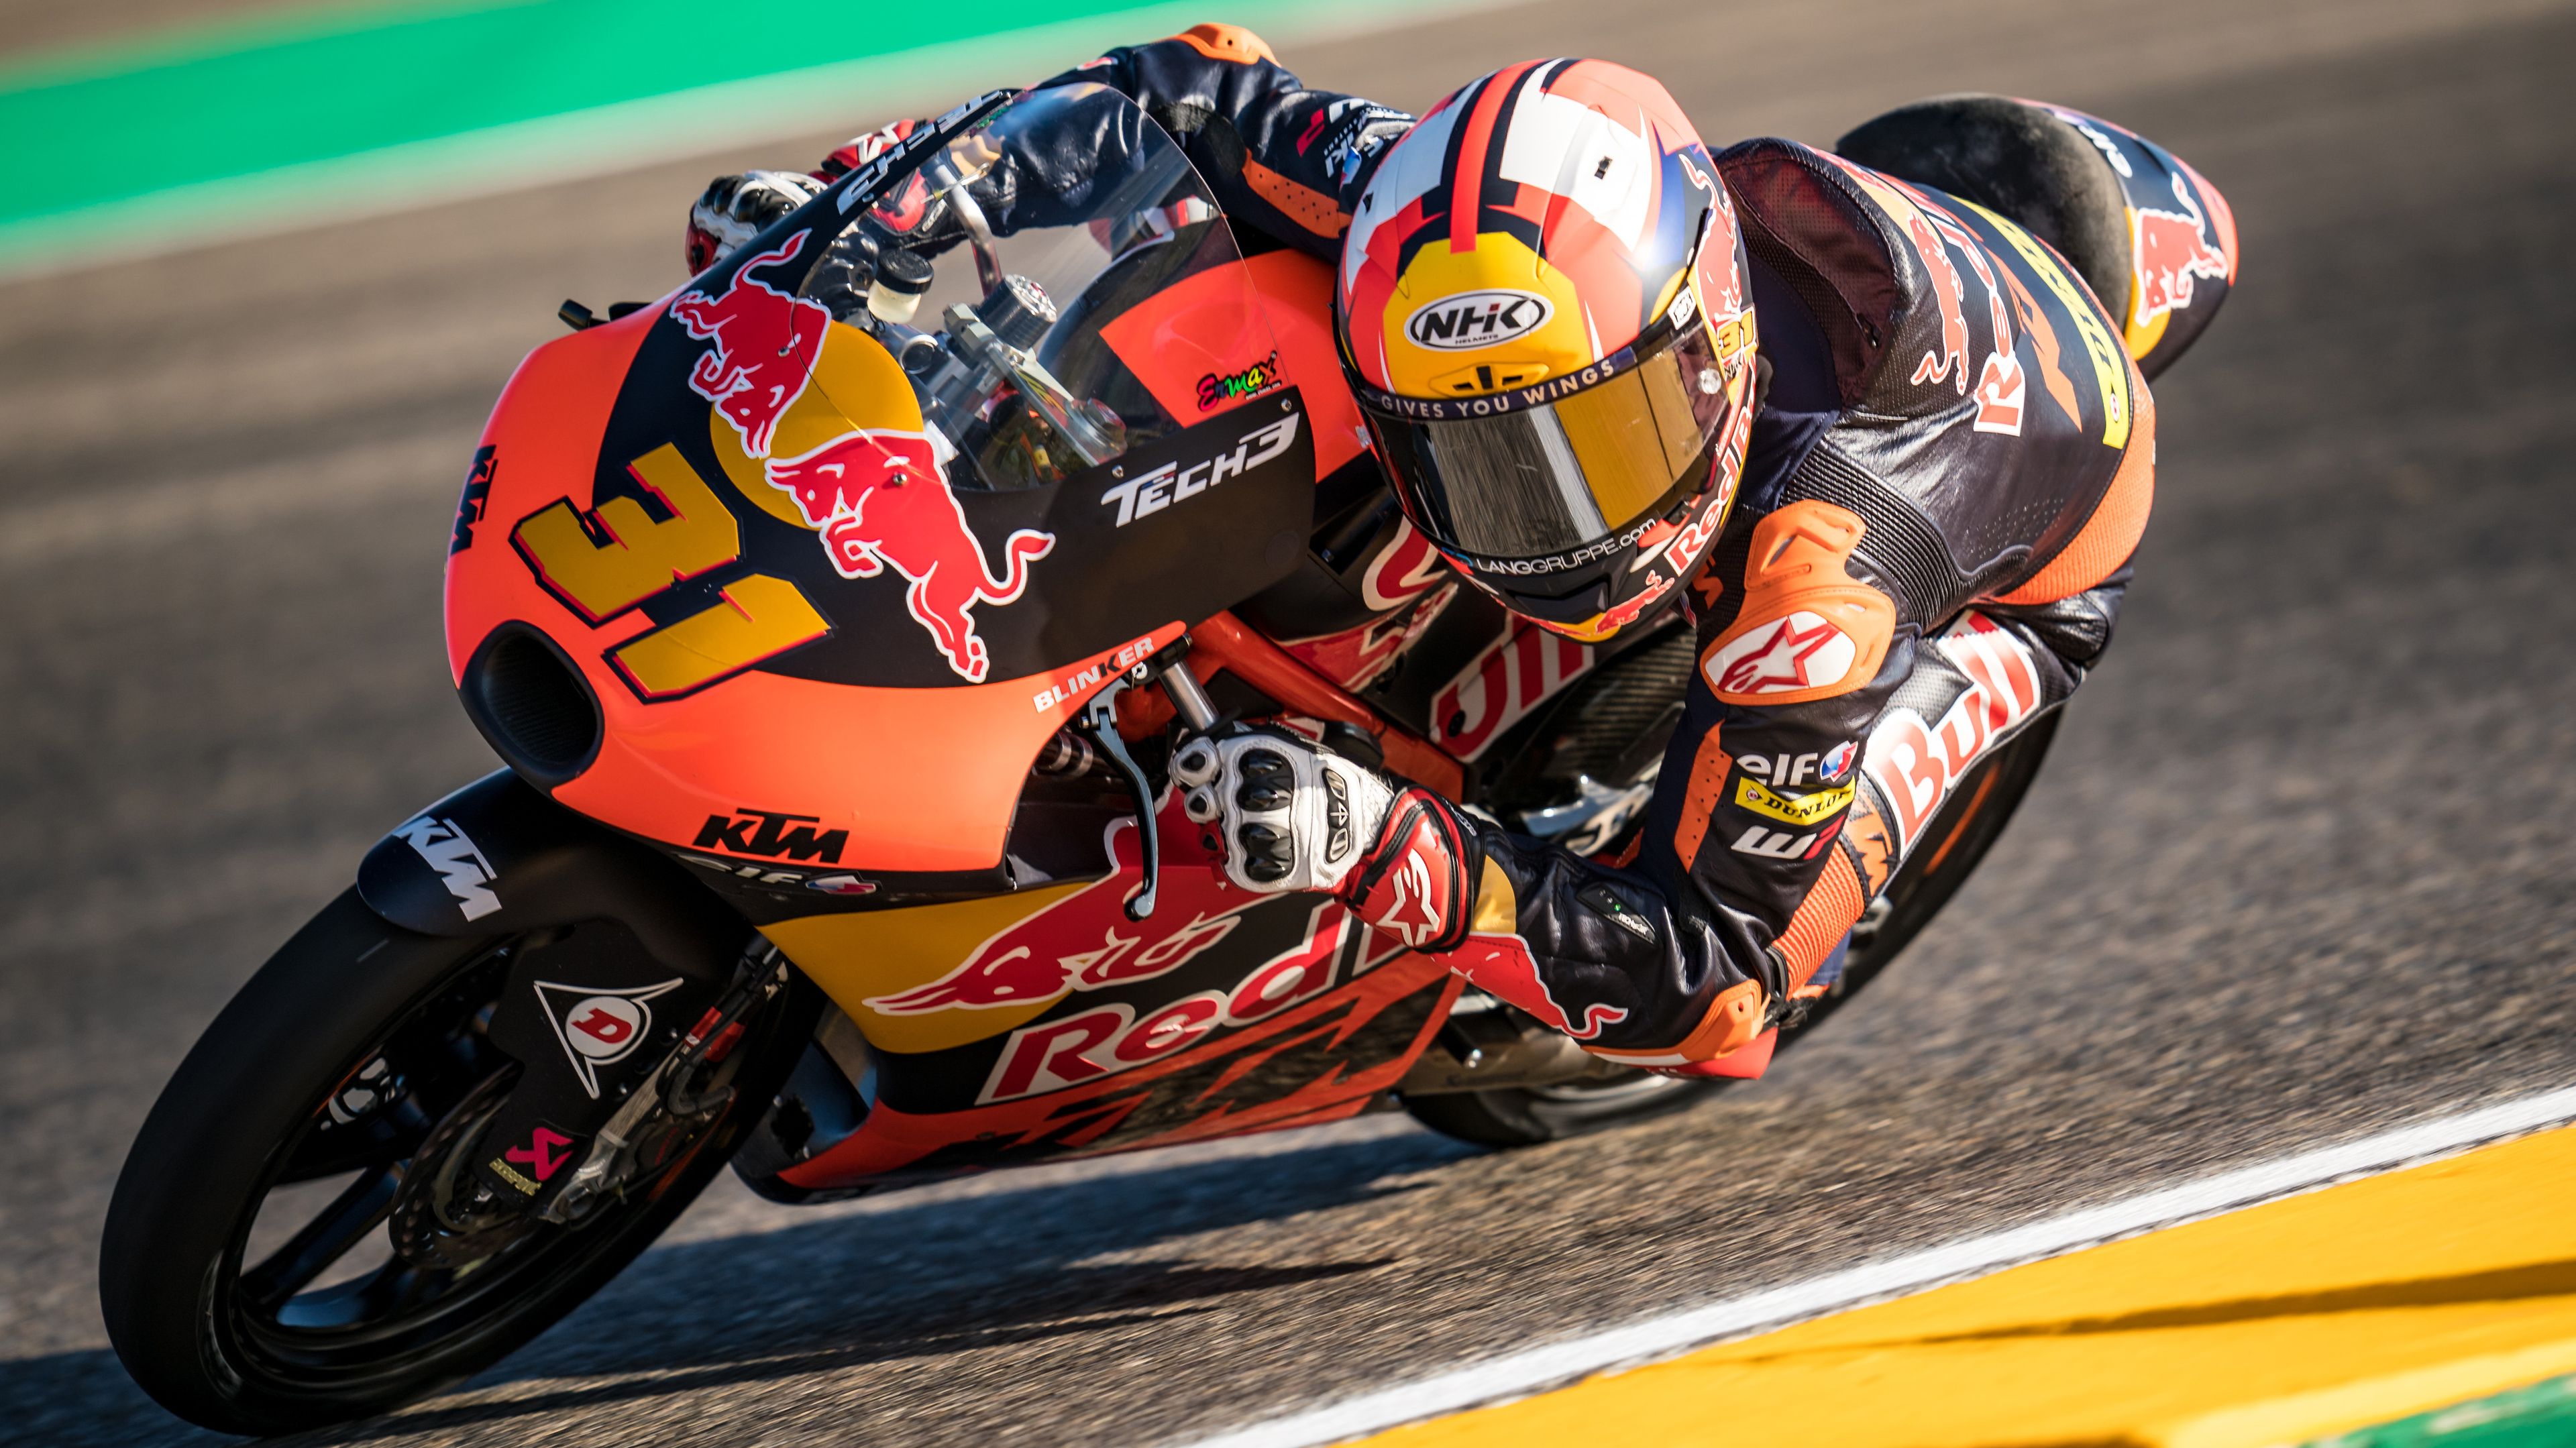 Moto3 rider Adrian Fernandez of Spain and Red Bull KTM Tech 3 rides during the free practice of the MotoGP Gran Premio Animoca Brands de Aragón at Motorland Aragon Circuit on September 16, 2022 in Alcaniz, Spain. (Photo by Steve Wobser/Getty Images)